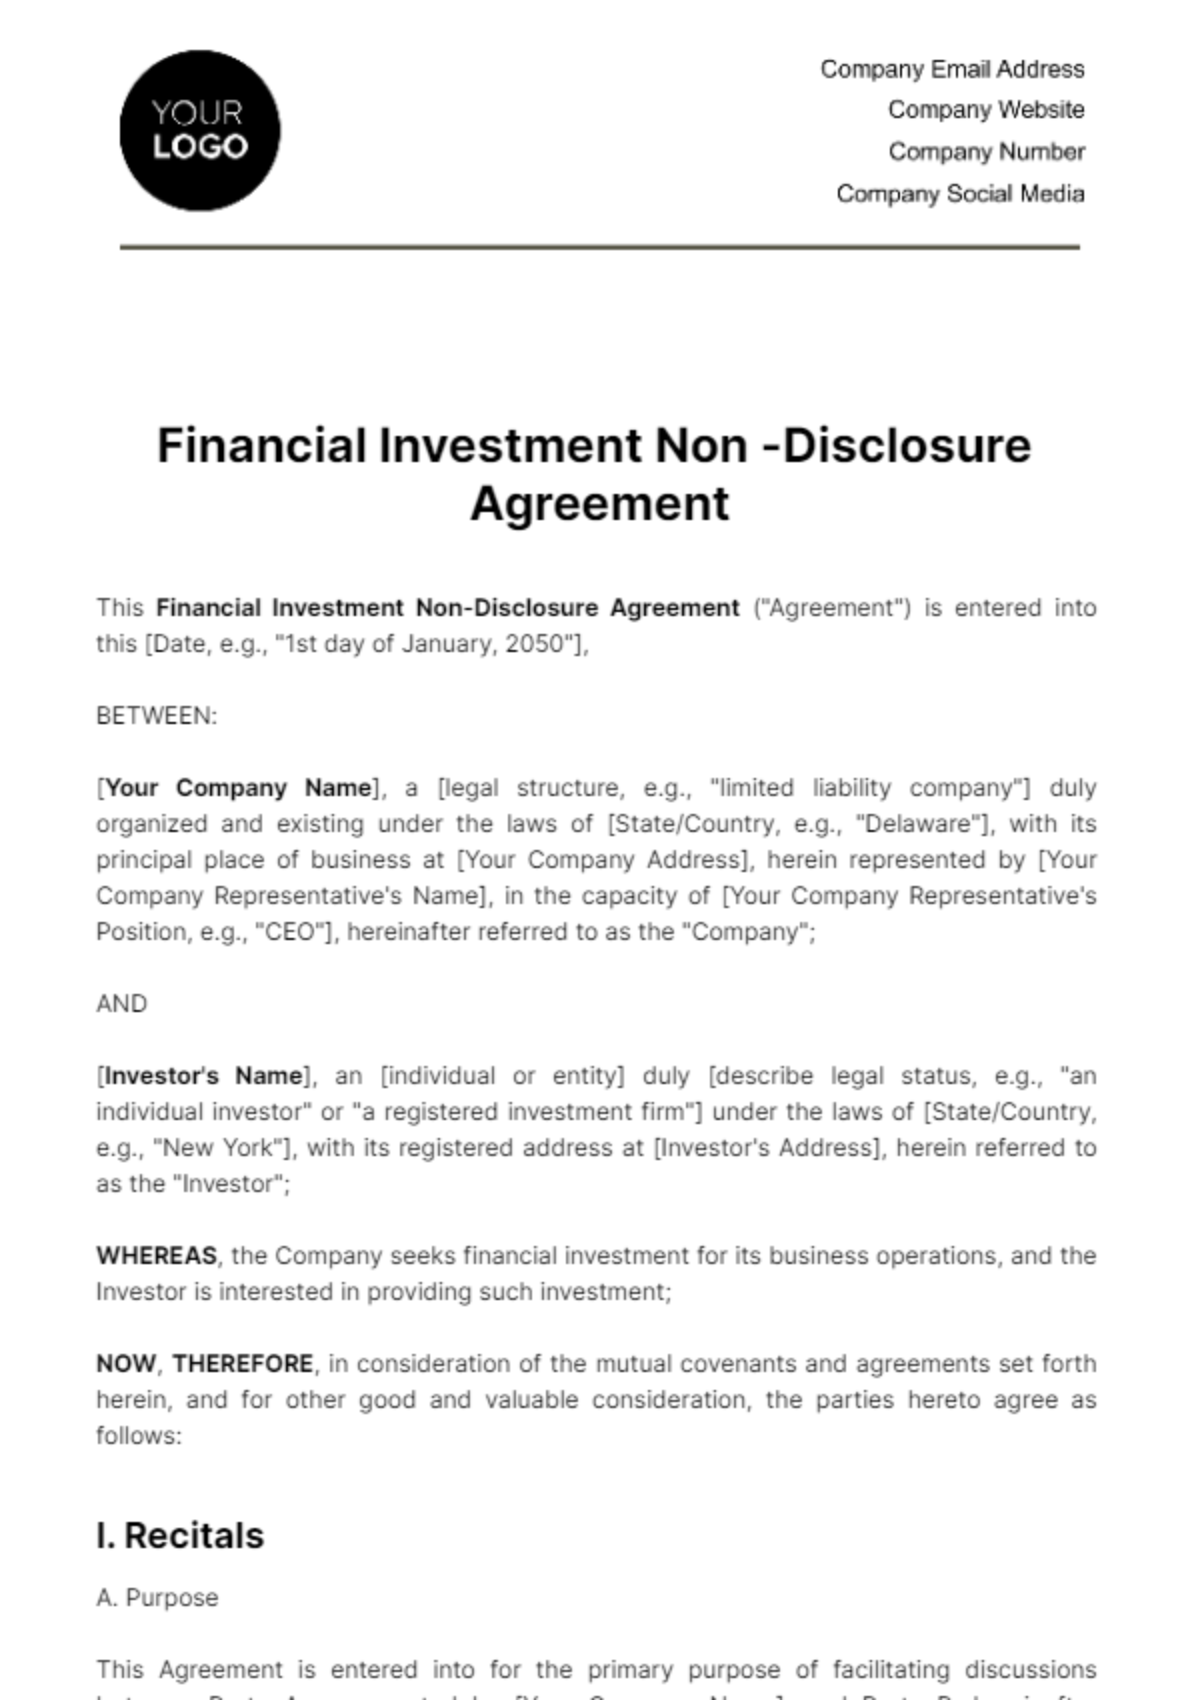 Financial Investment Non-Disclosure Agreement Template